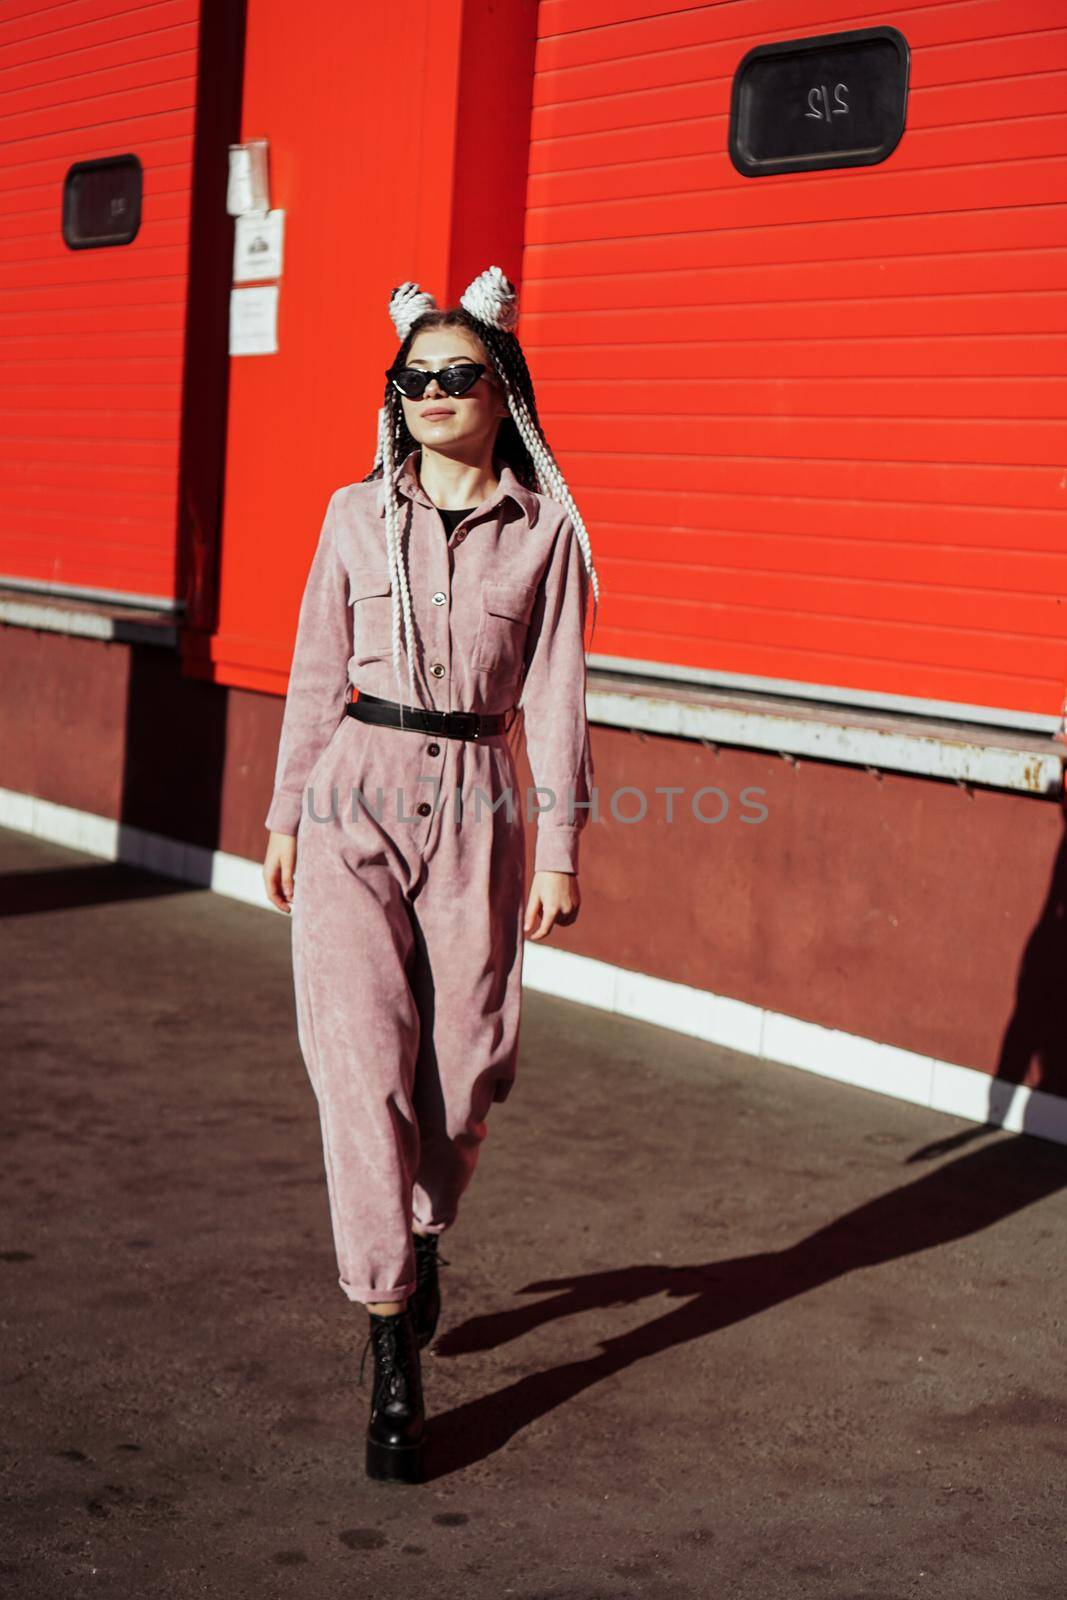 Beautiful cool girl with dreadlocks full length. Photo in the city - urban style